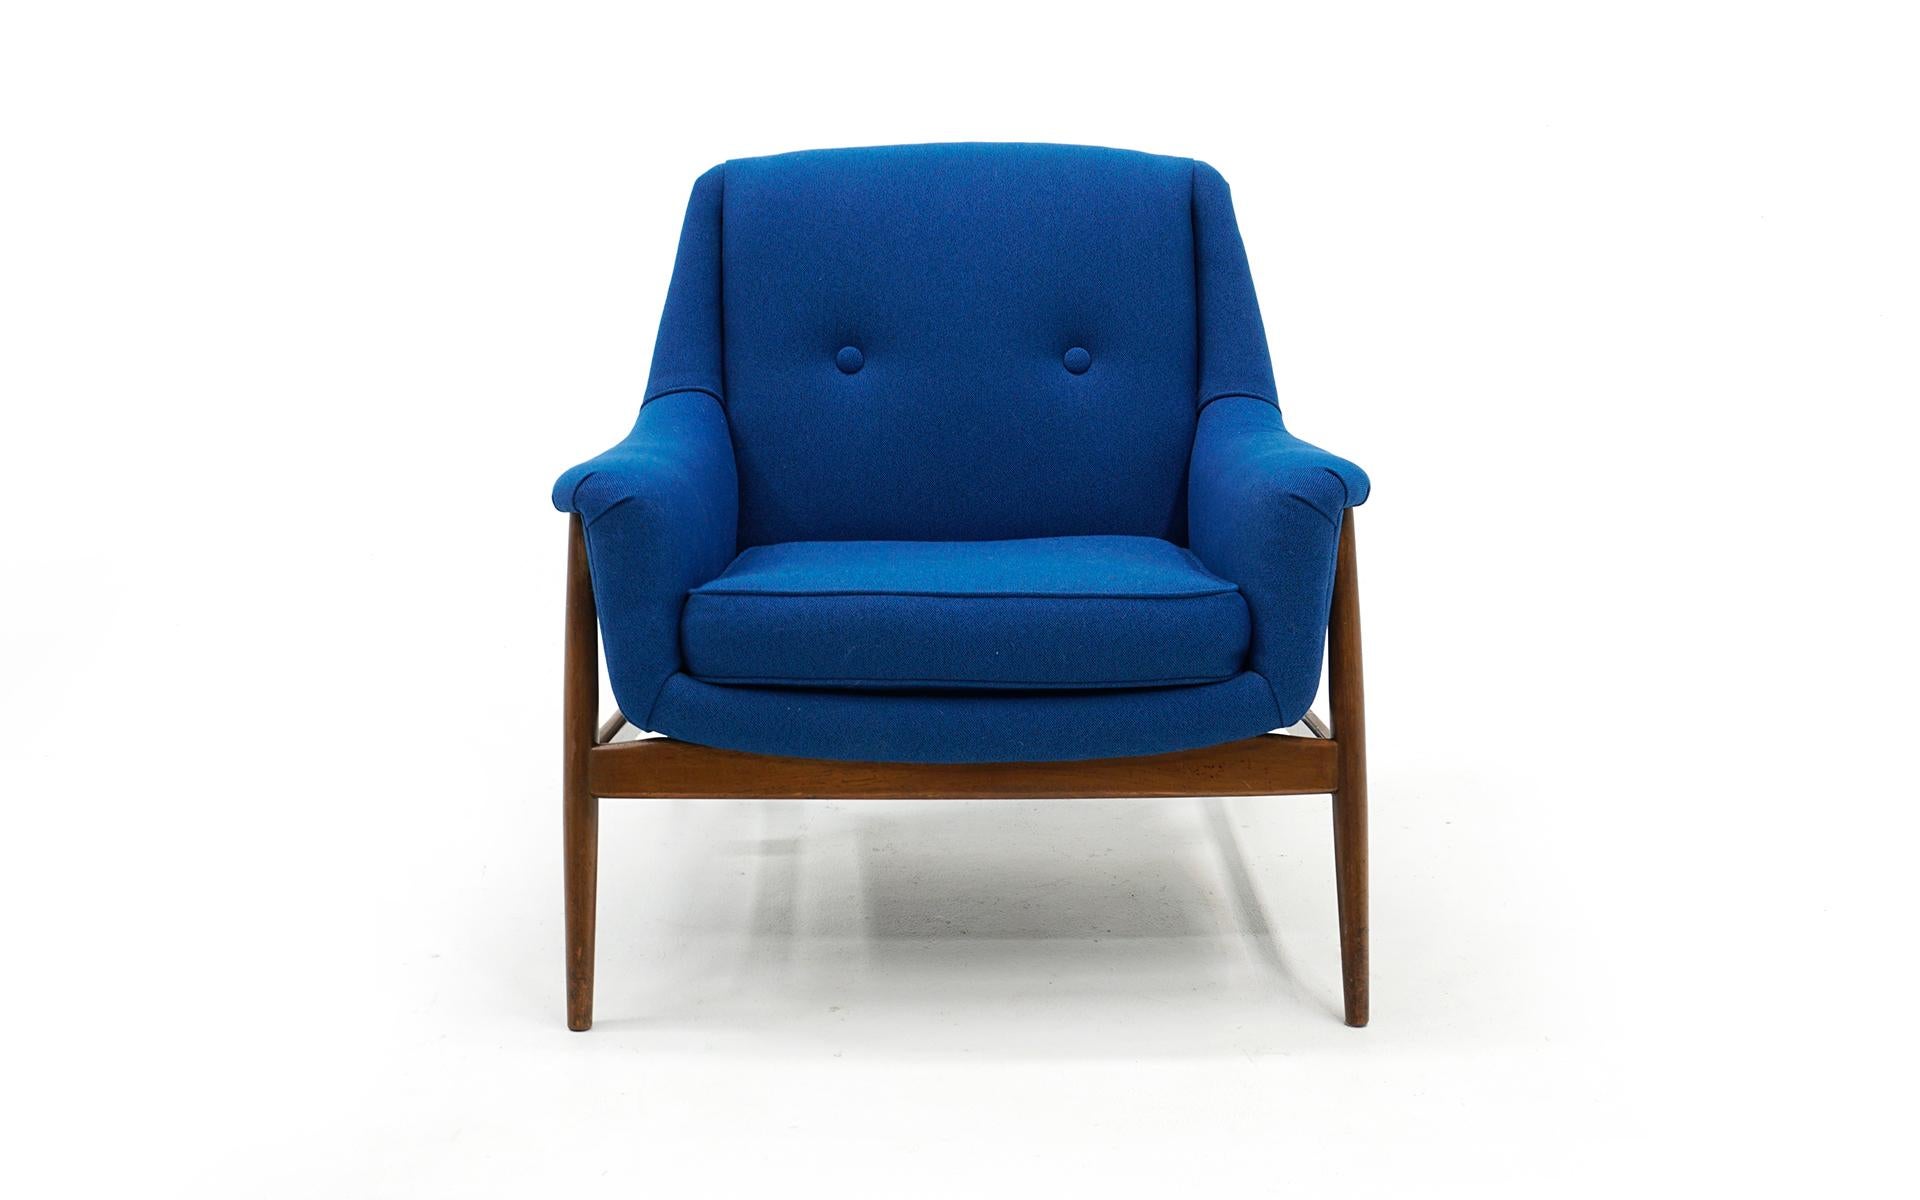 Danish modern lounge chair in the style of Folke Ohlsson. Expertly reupholstered in a blue Maharam wool blend fabric. The frame is original with few signs of wear. Very comfortable.